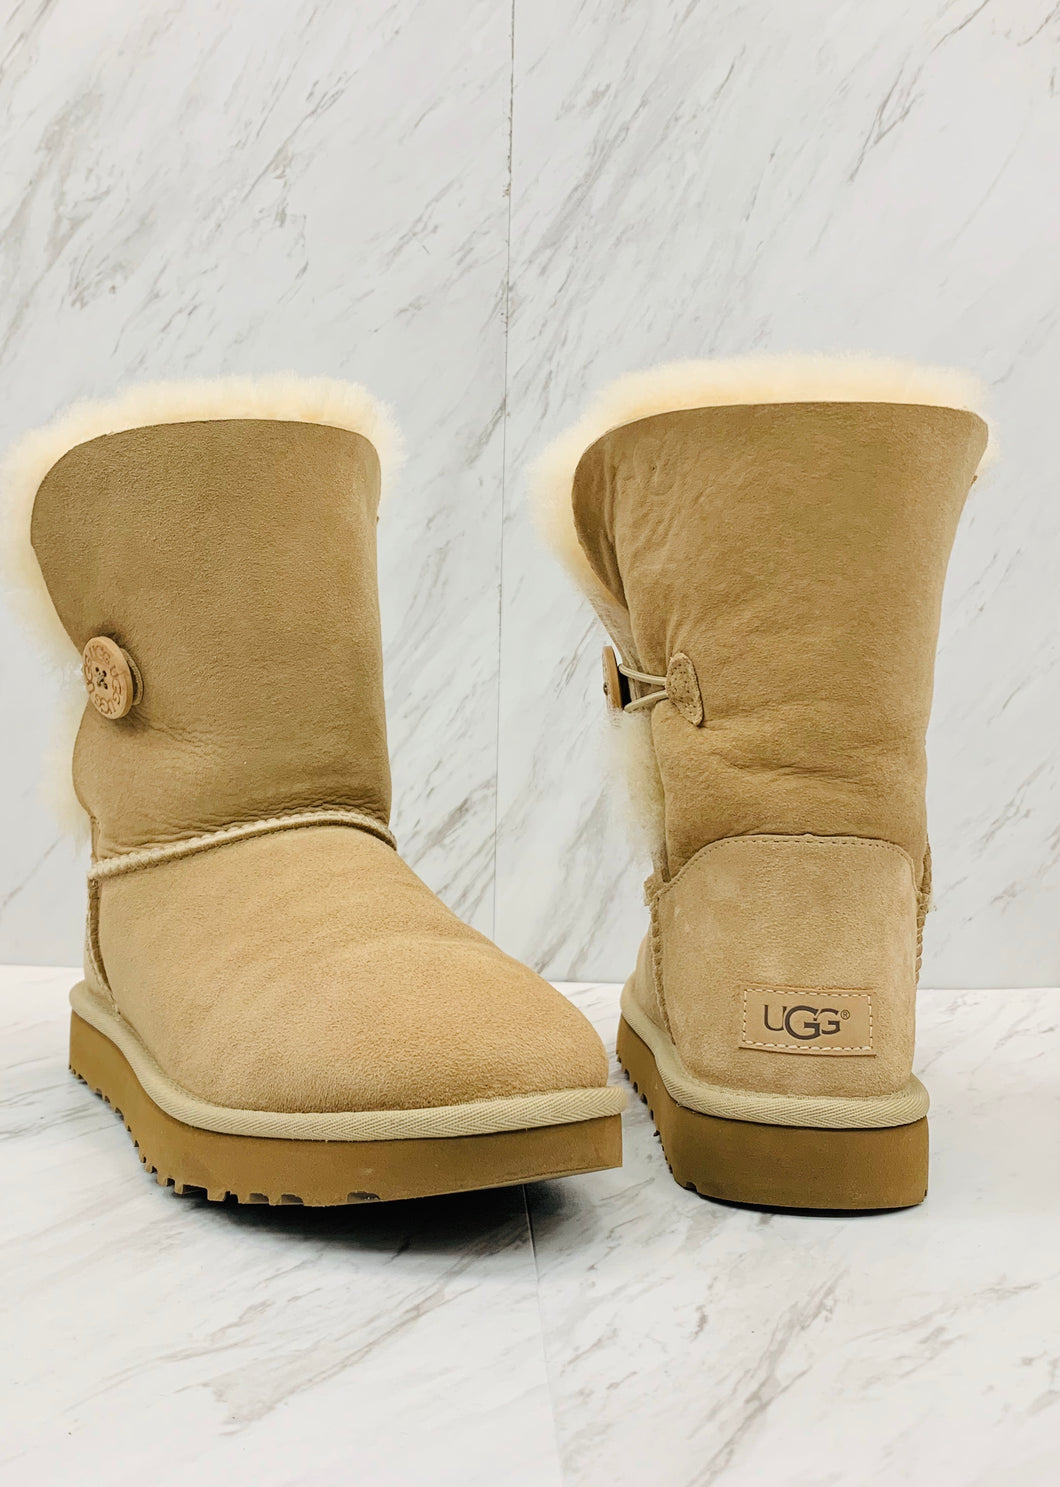 Uggs Boots Syn Women's 10